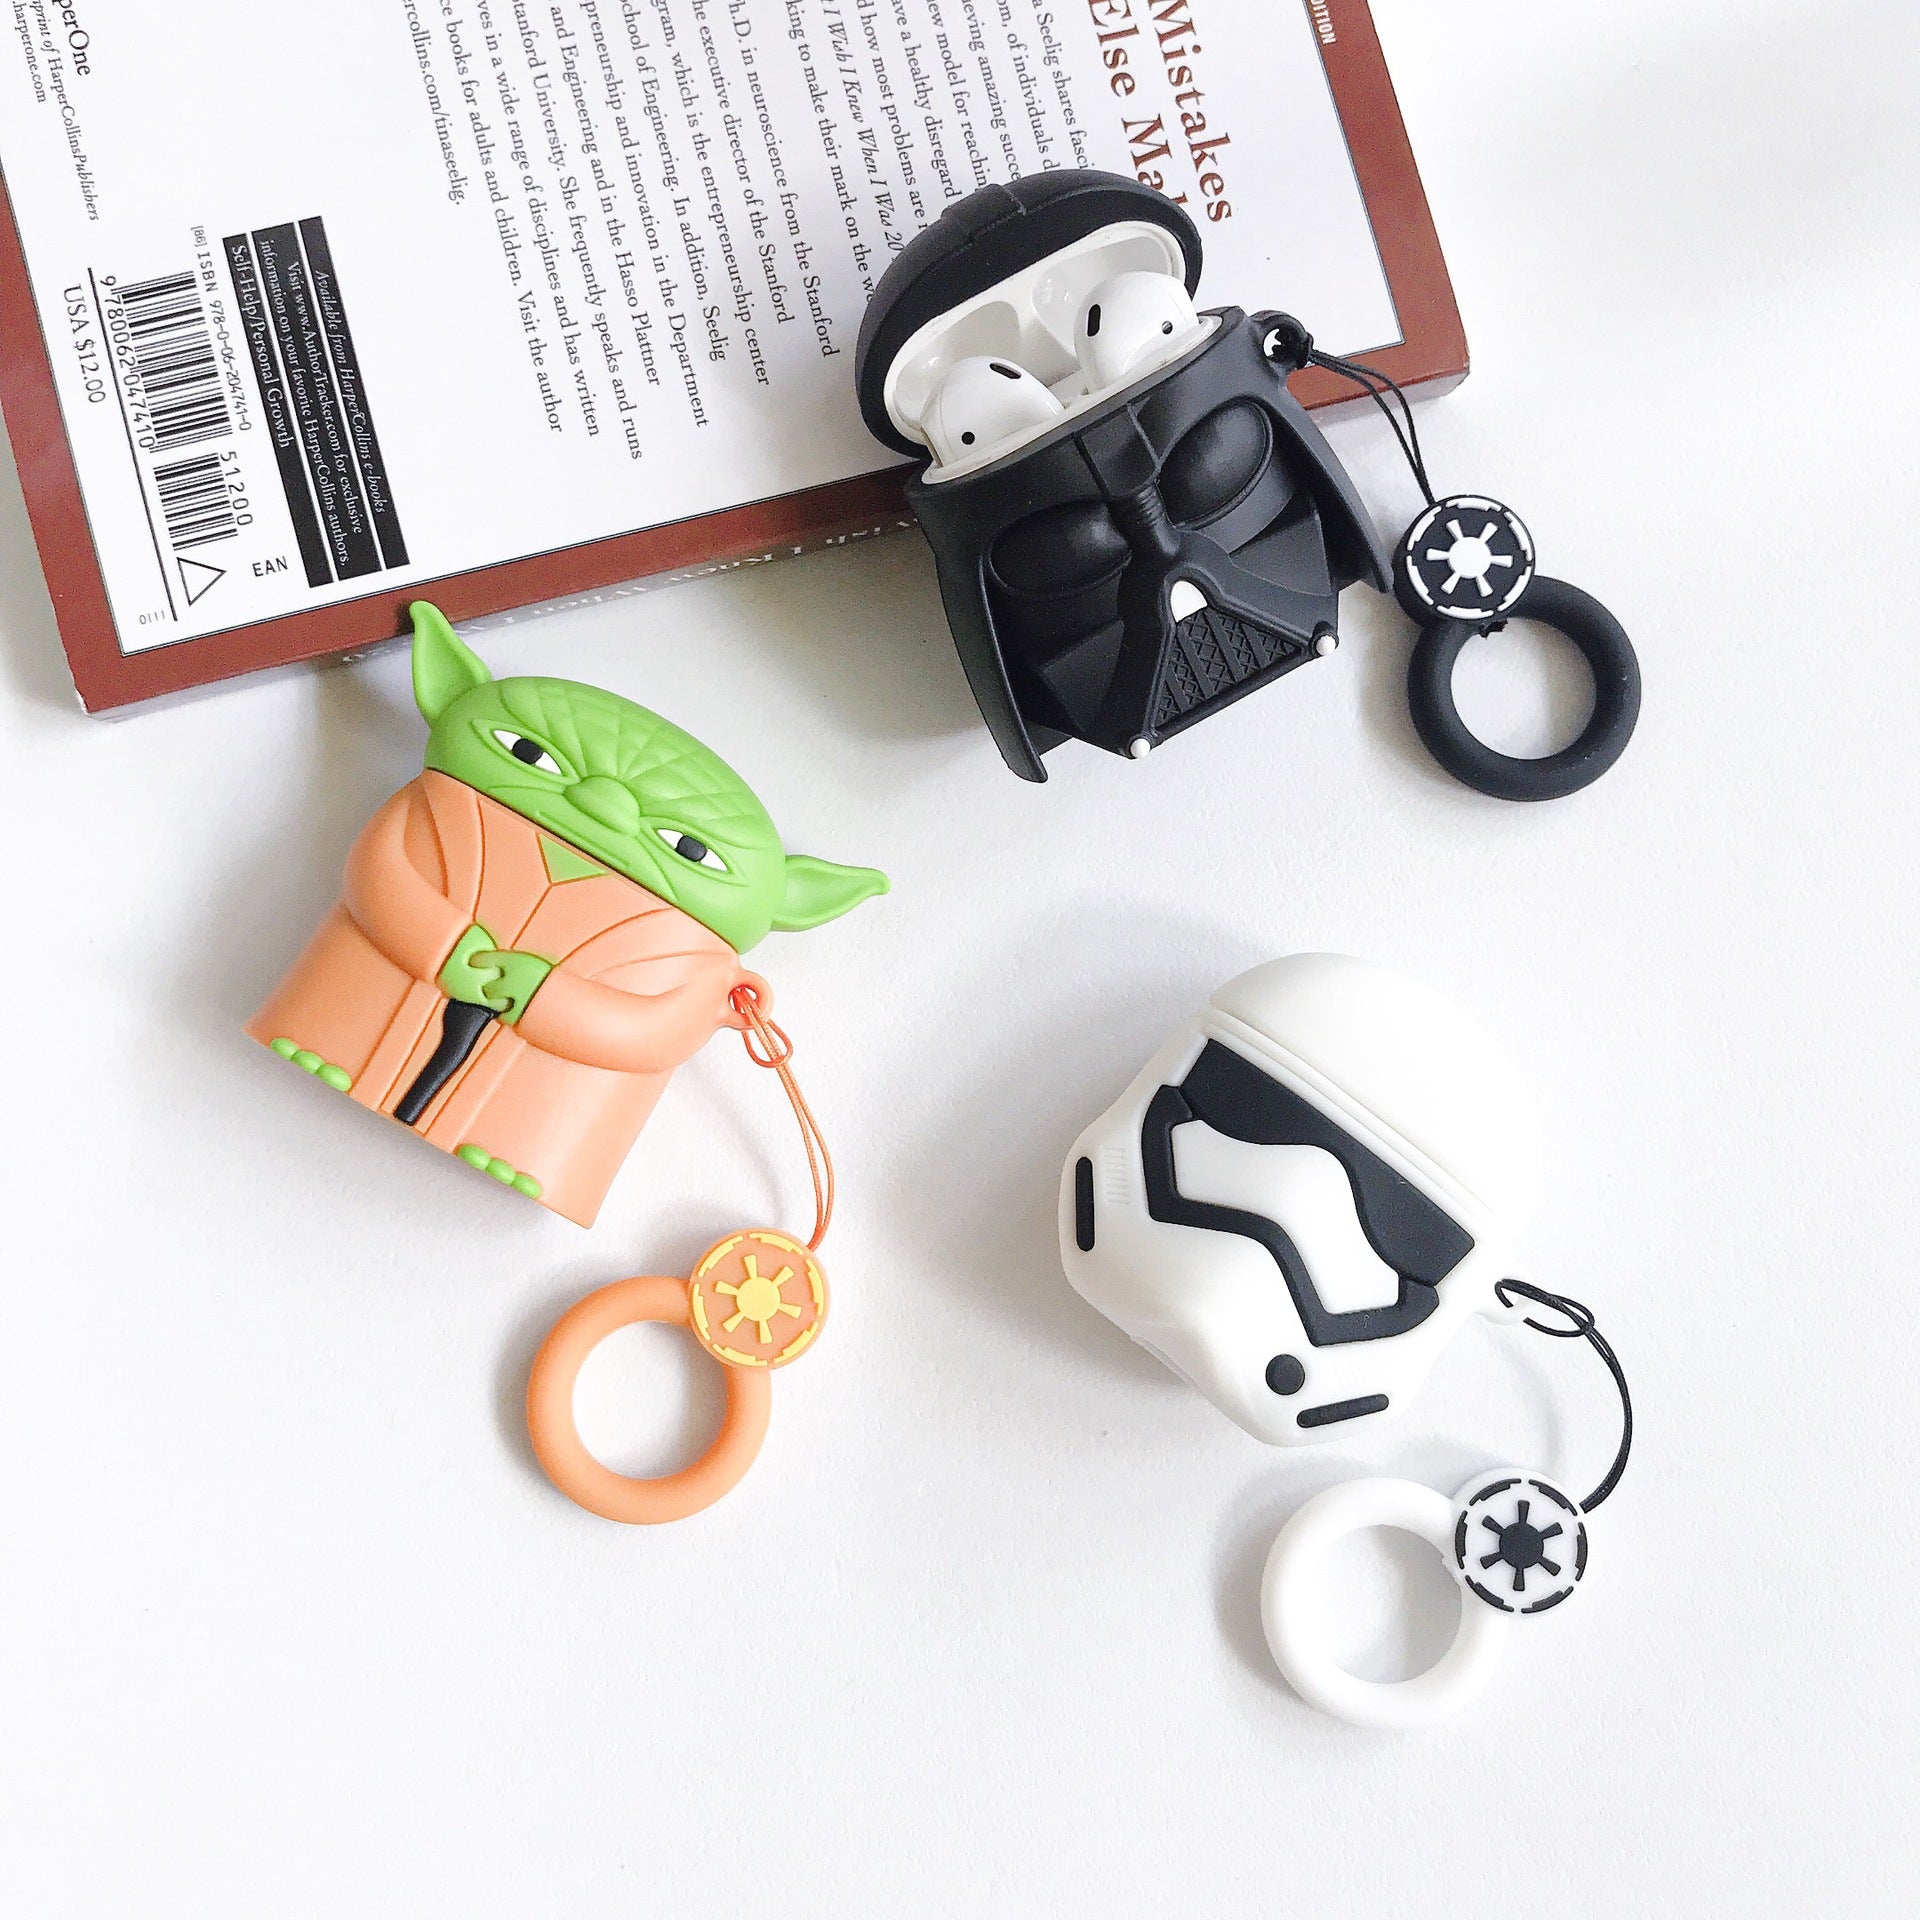 Starwars Stormtrooper Airpods Cover - Premium Silicone Case (Limited Edition)